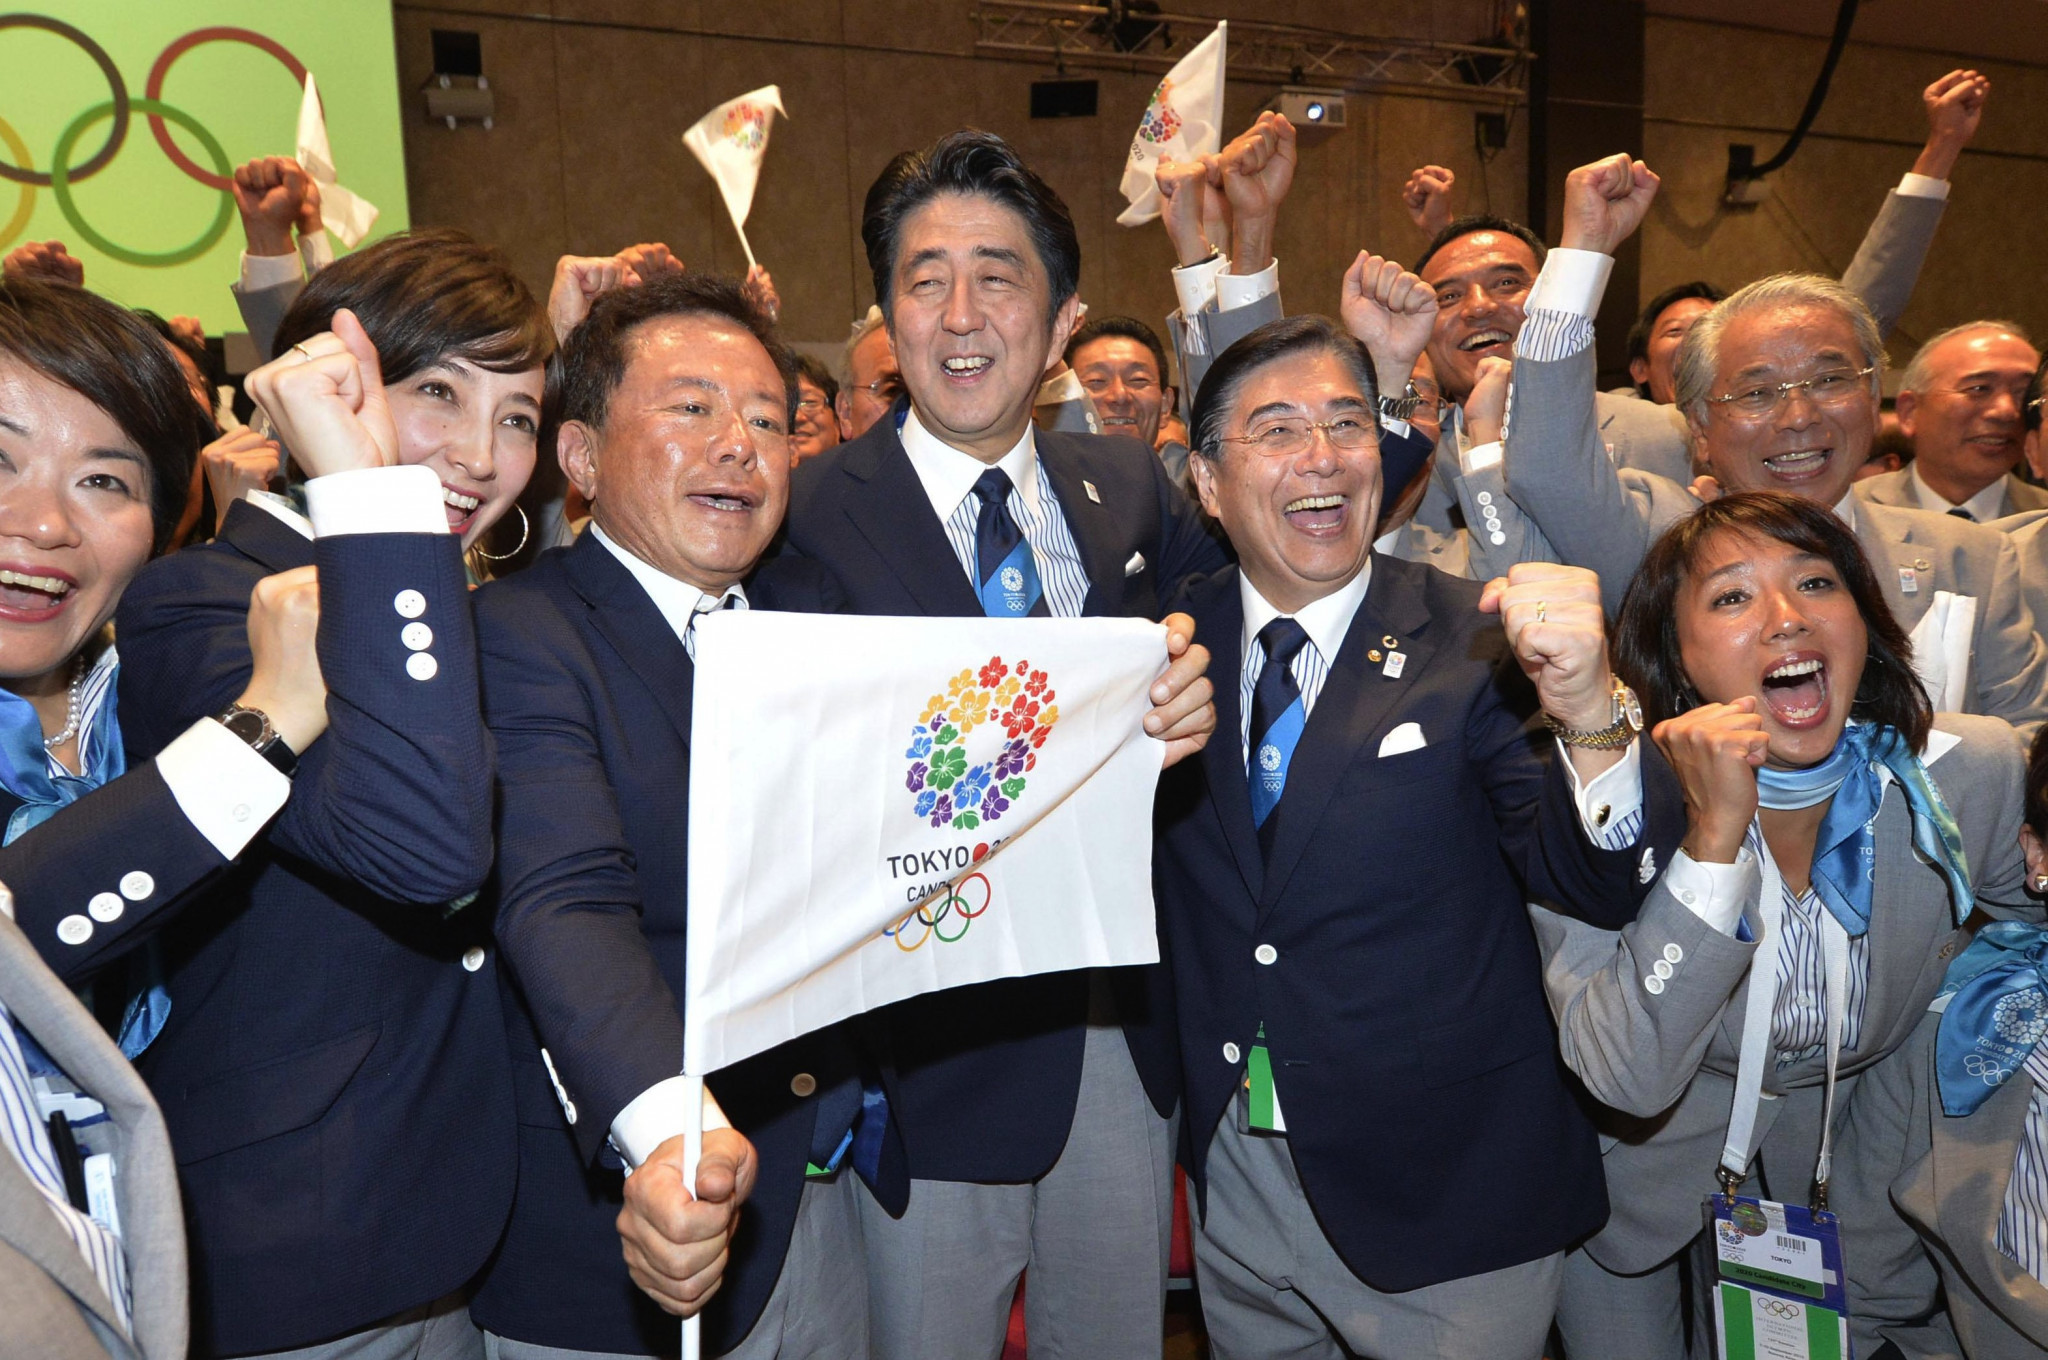 Shinzō Abe was at the start of his second spell as Japan's Prime Minister when he attended the 2013 IOC Session in Buenos Aires where Tokyo were awarded the 2020 Olympic and Paralympic Games ©Getty Images